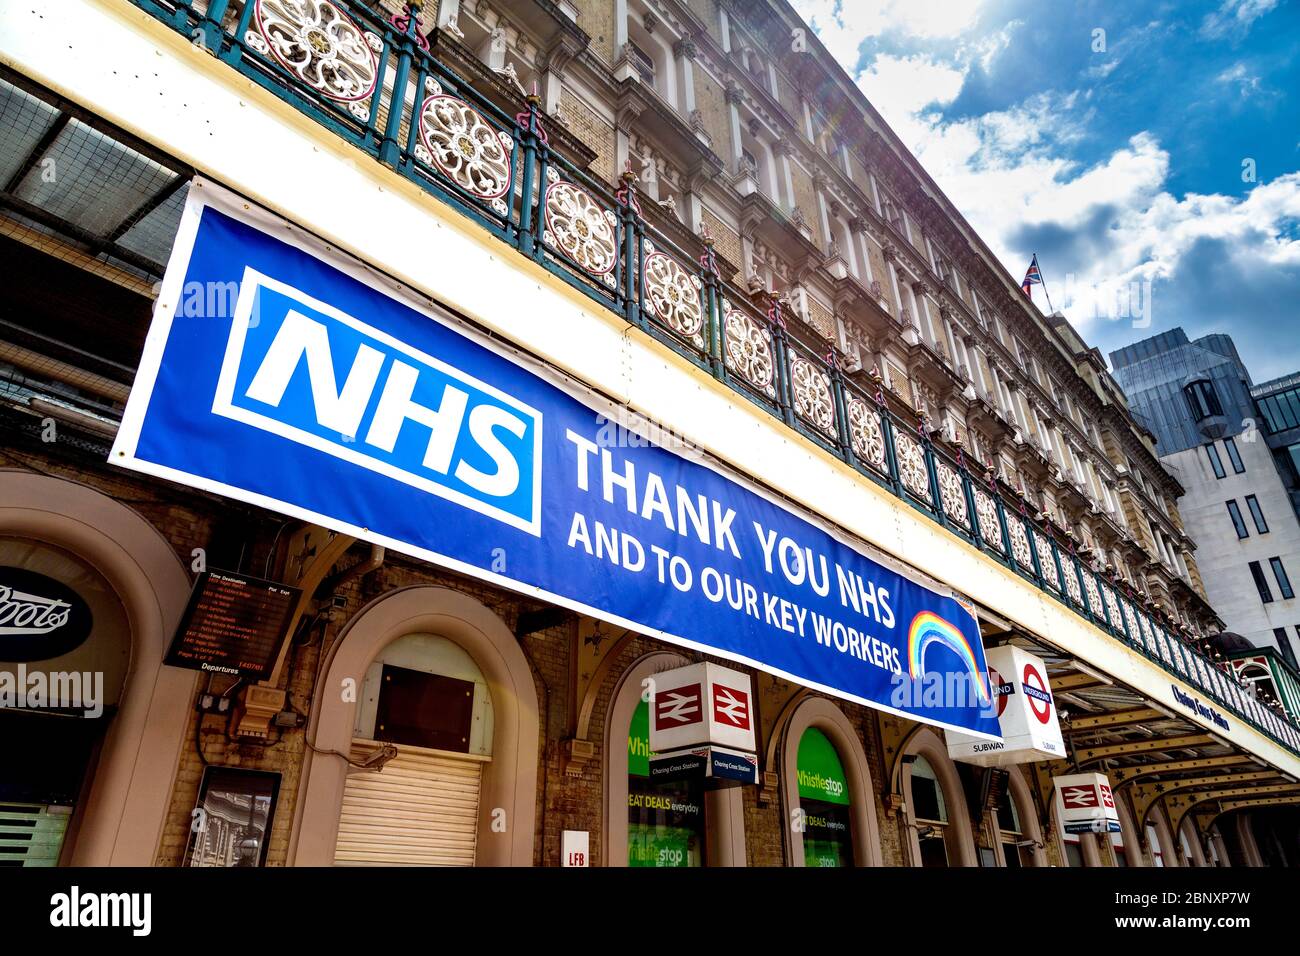 16 May 2020 London, UK - Thank you message banner to NHS nurses, doctors and key workers on the facade of Charing Cross Station during the Coronavirus pandemic lockdown Stock Photo